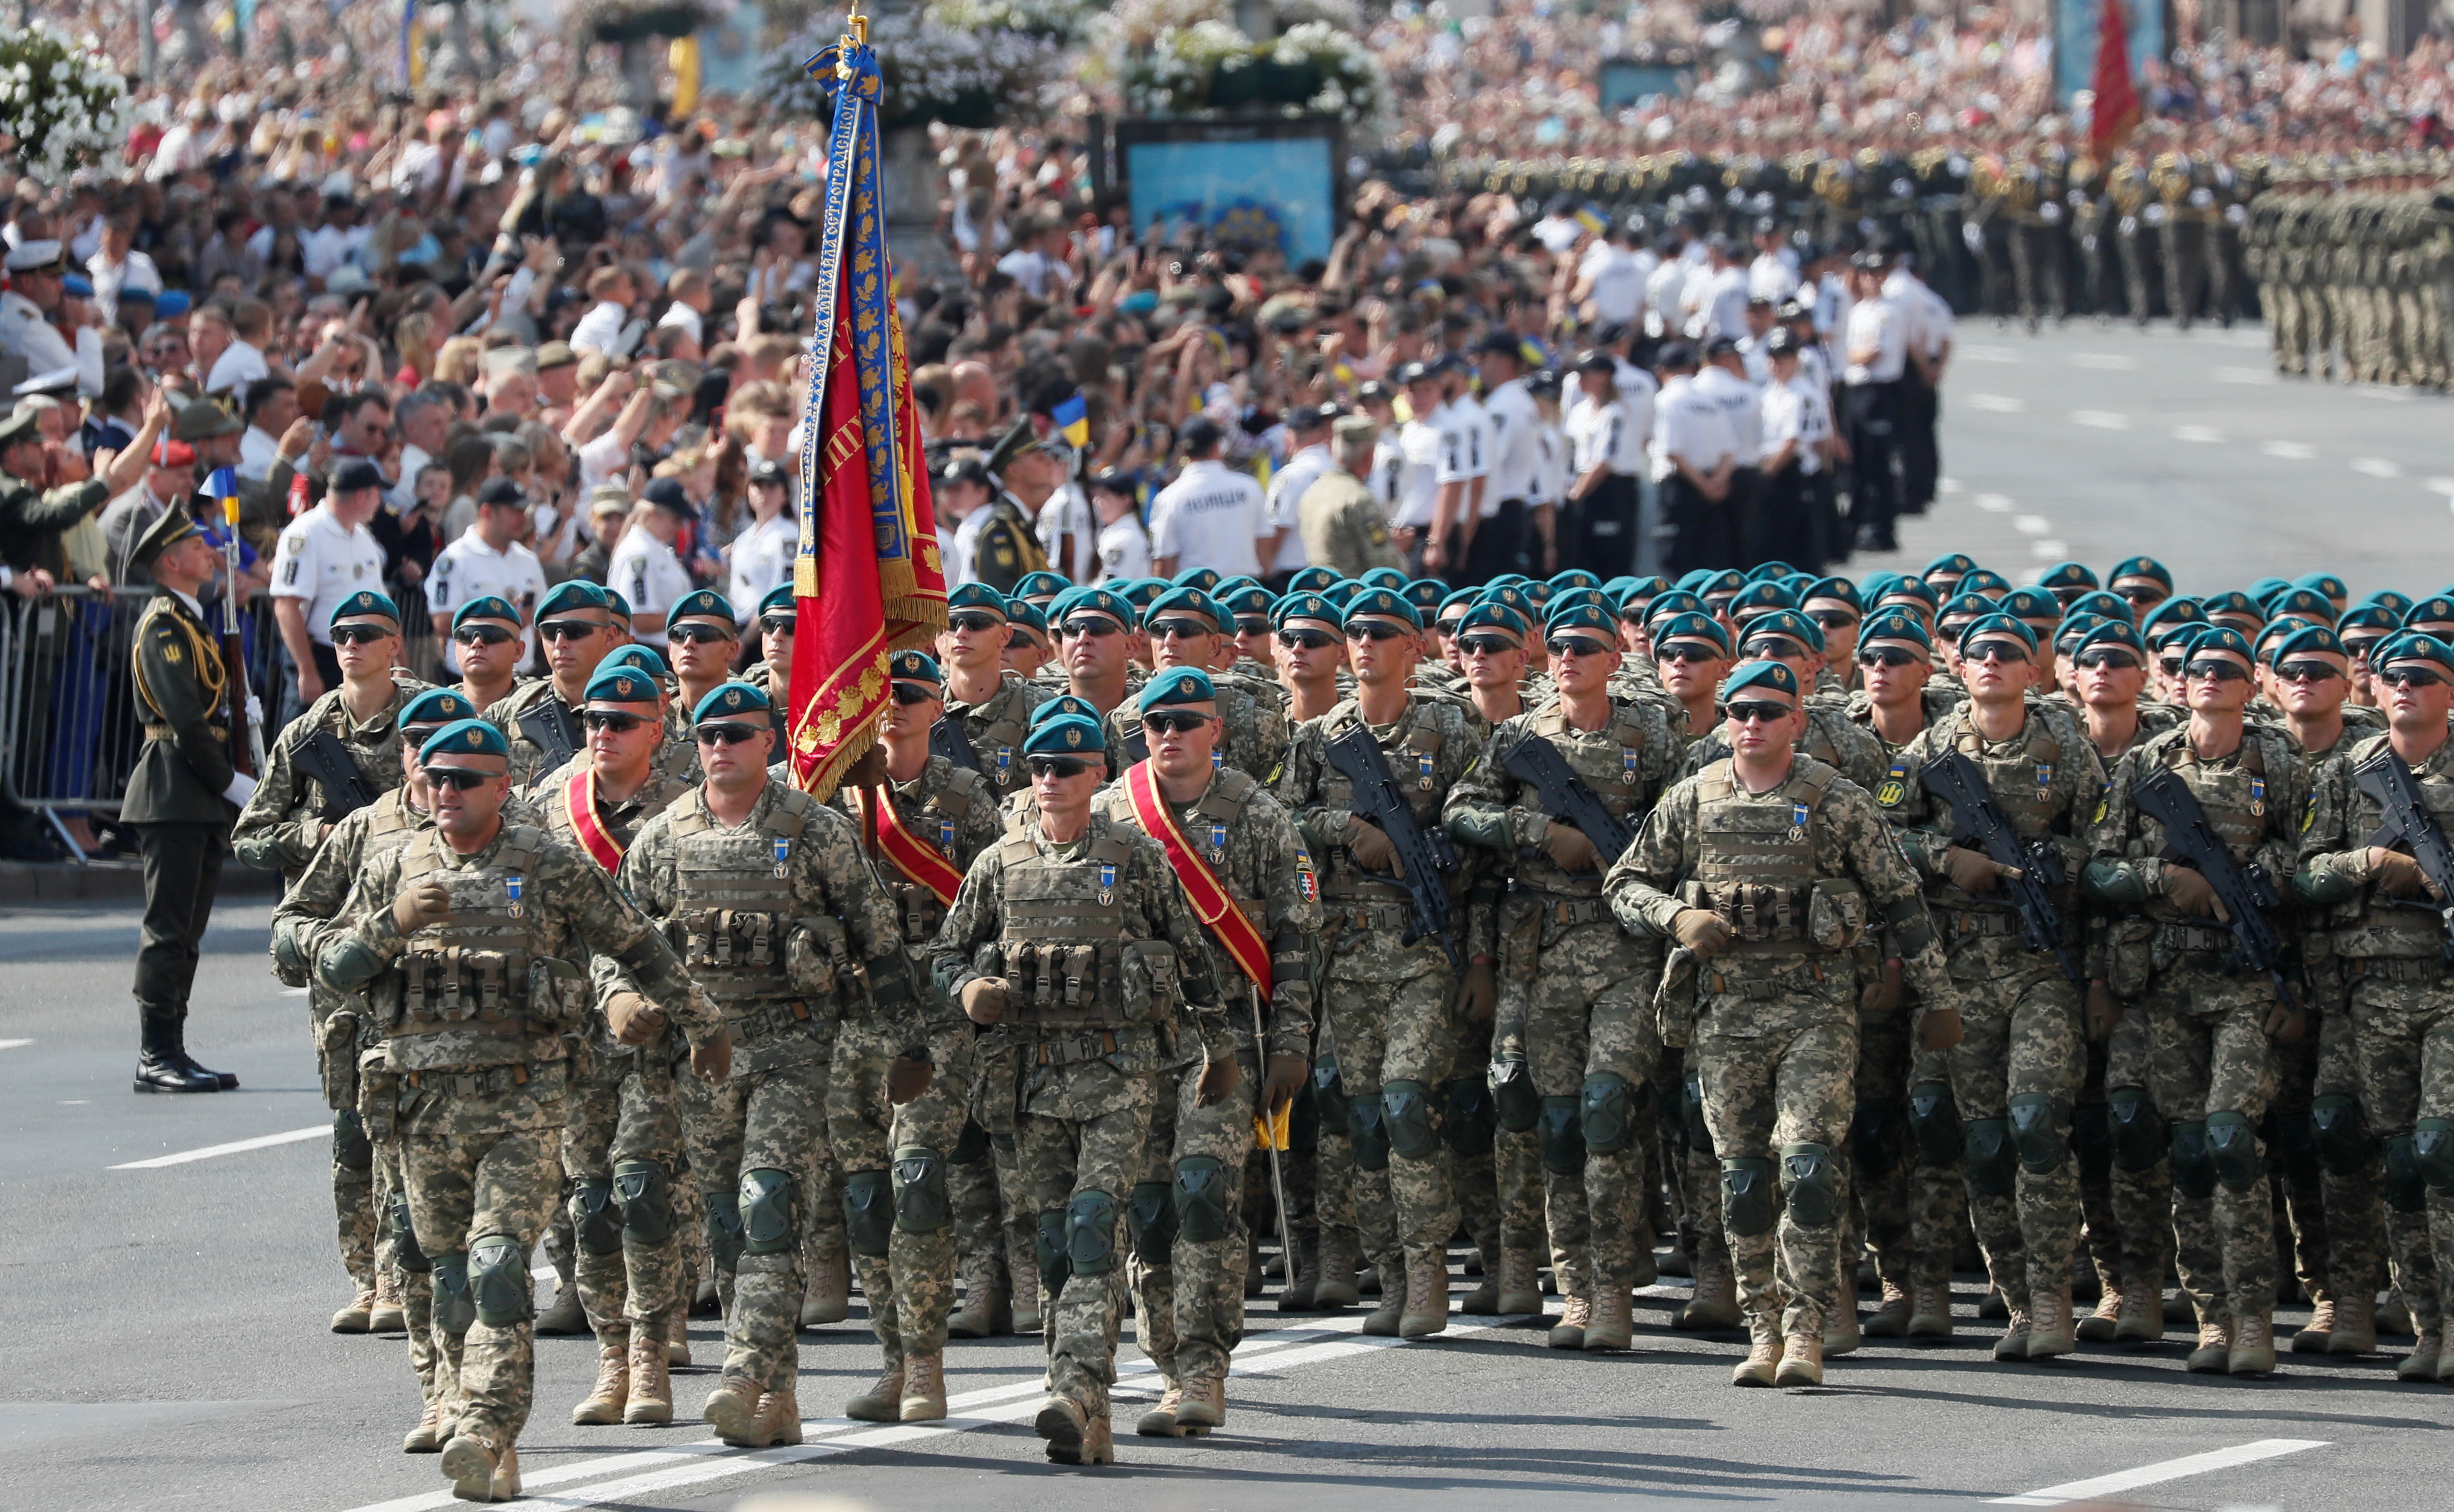 Ukrainian service members take part in the Independence Day military parade in Kyiv